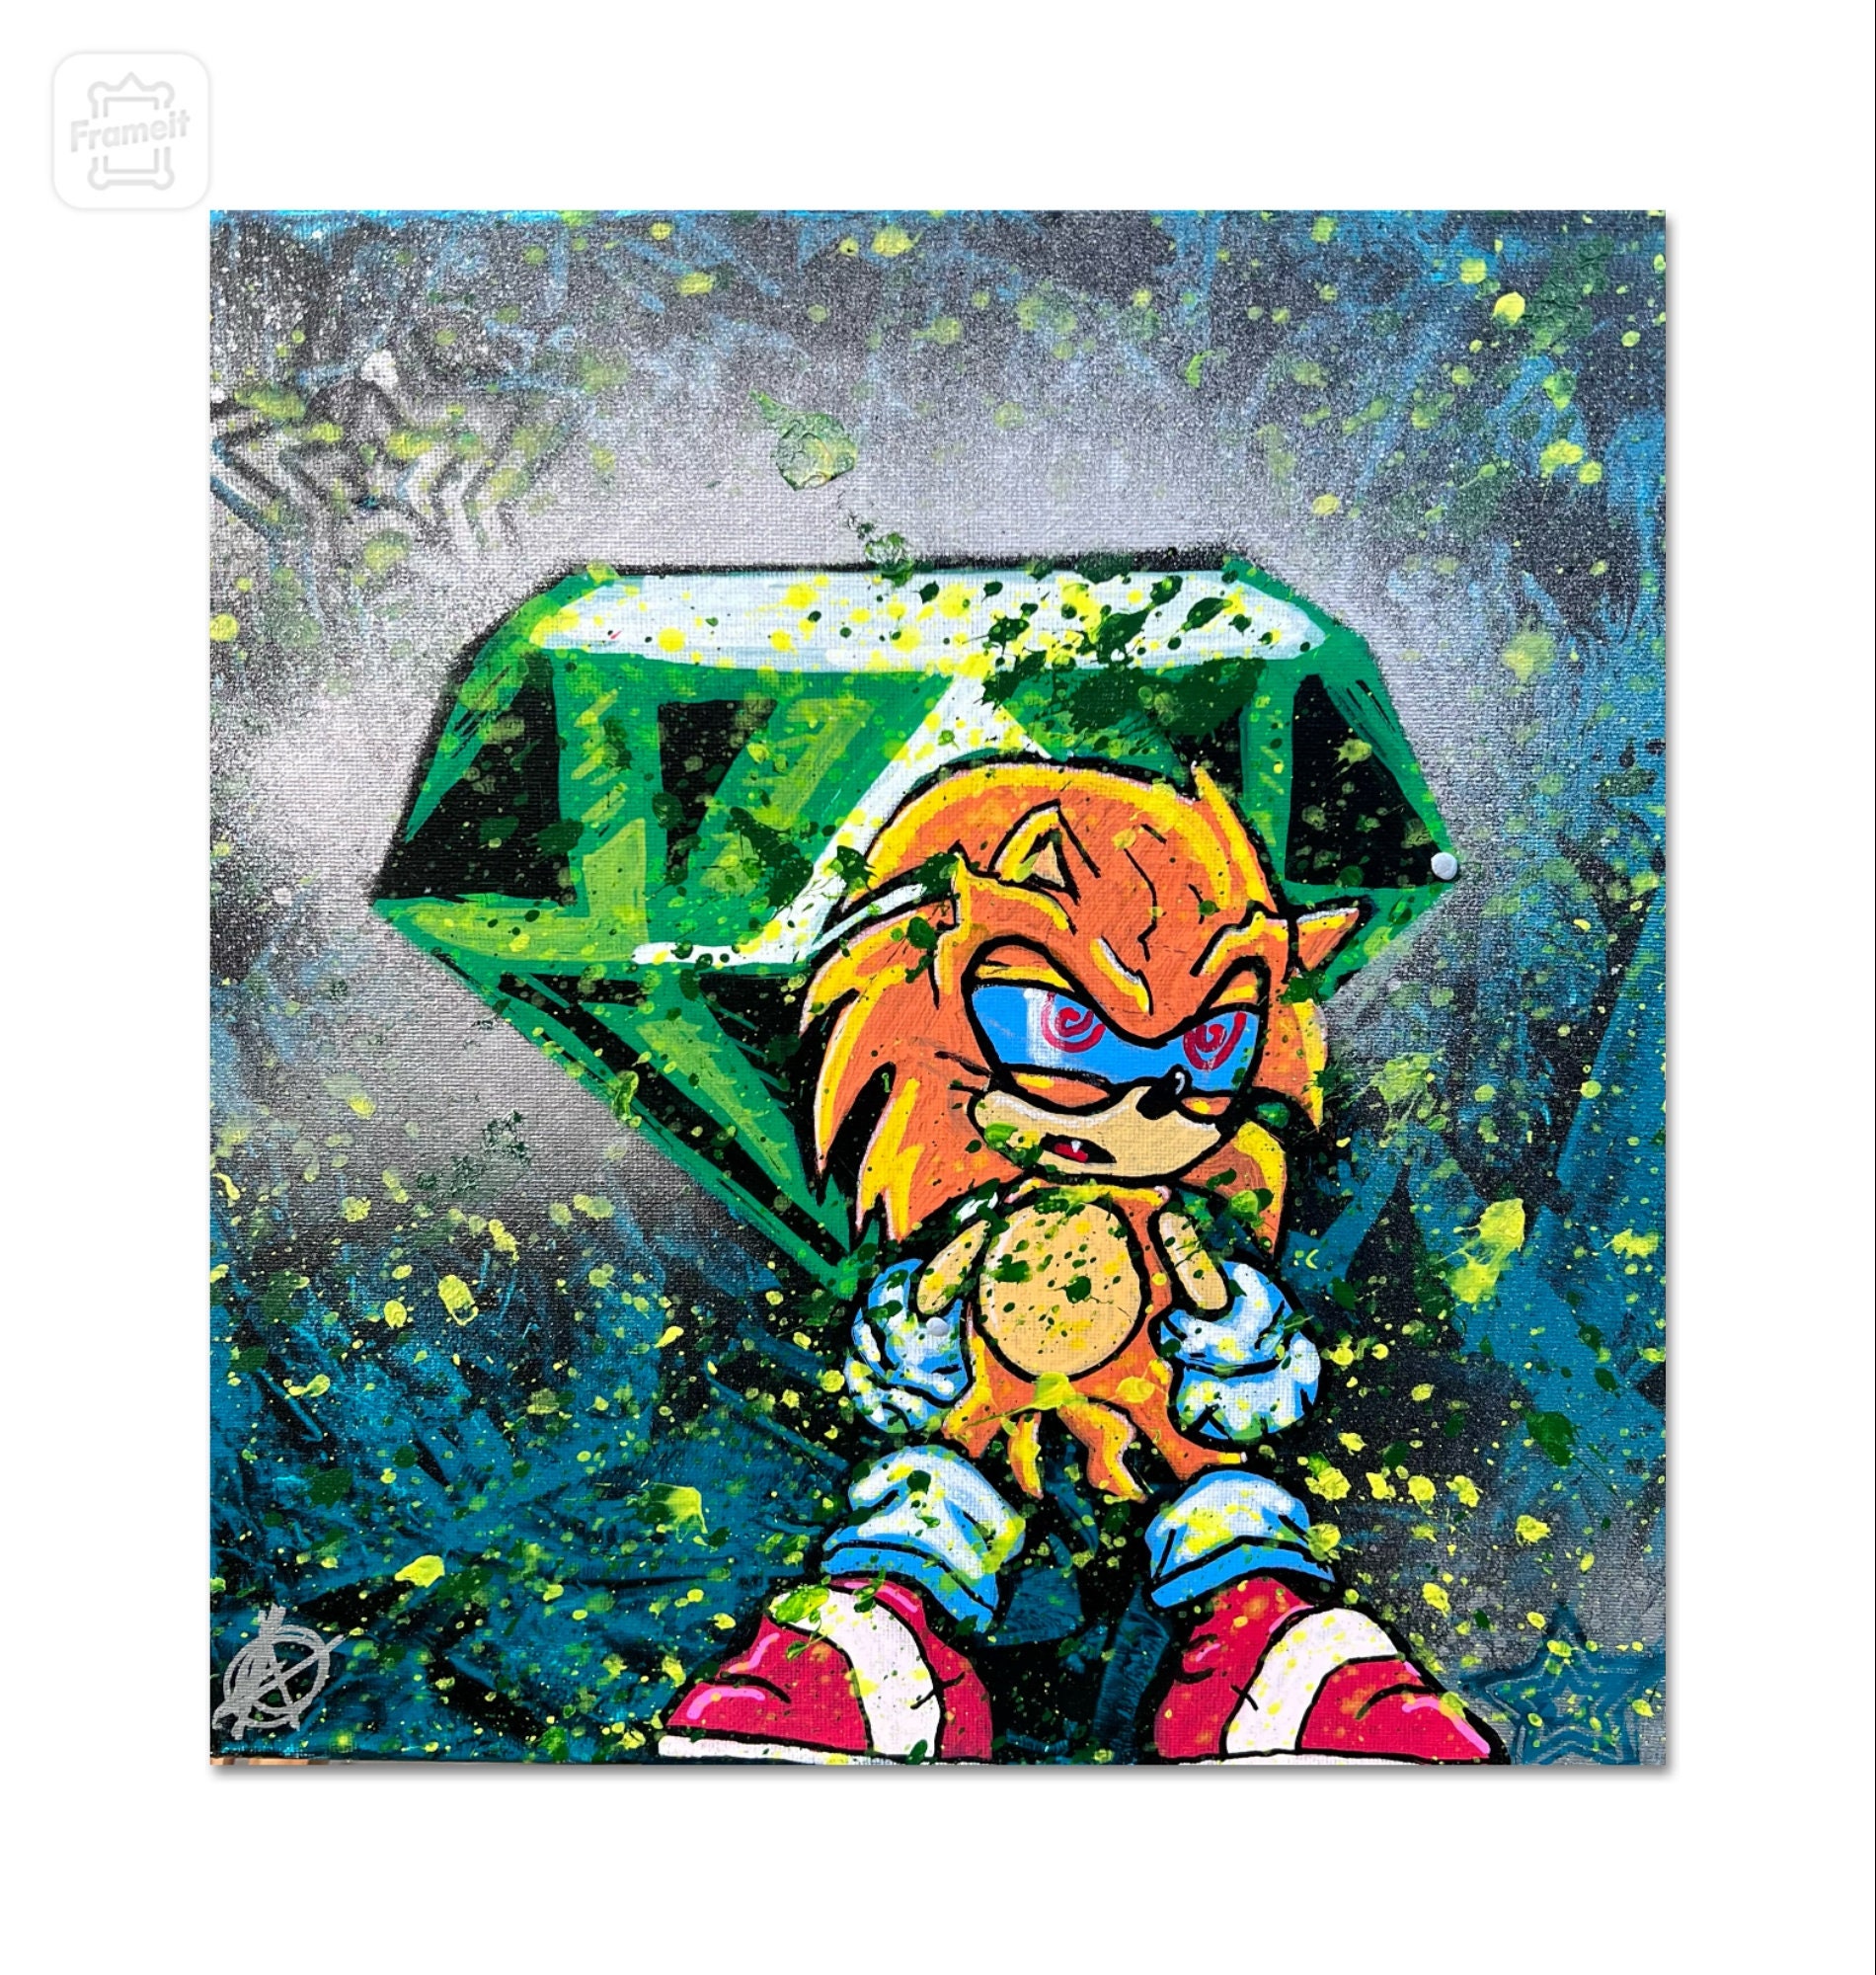 Sonic the Hedgehog / 7 Chaos Emeralds and 5 Power Rings IN A BAG